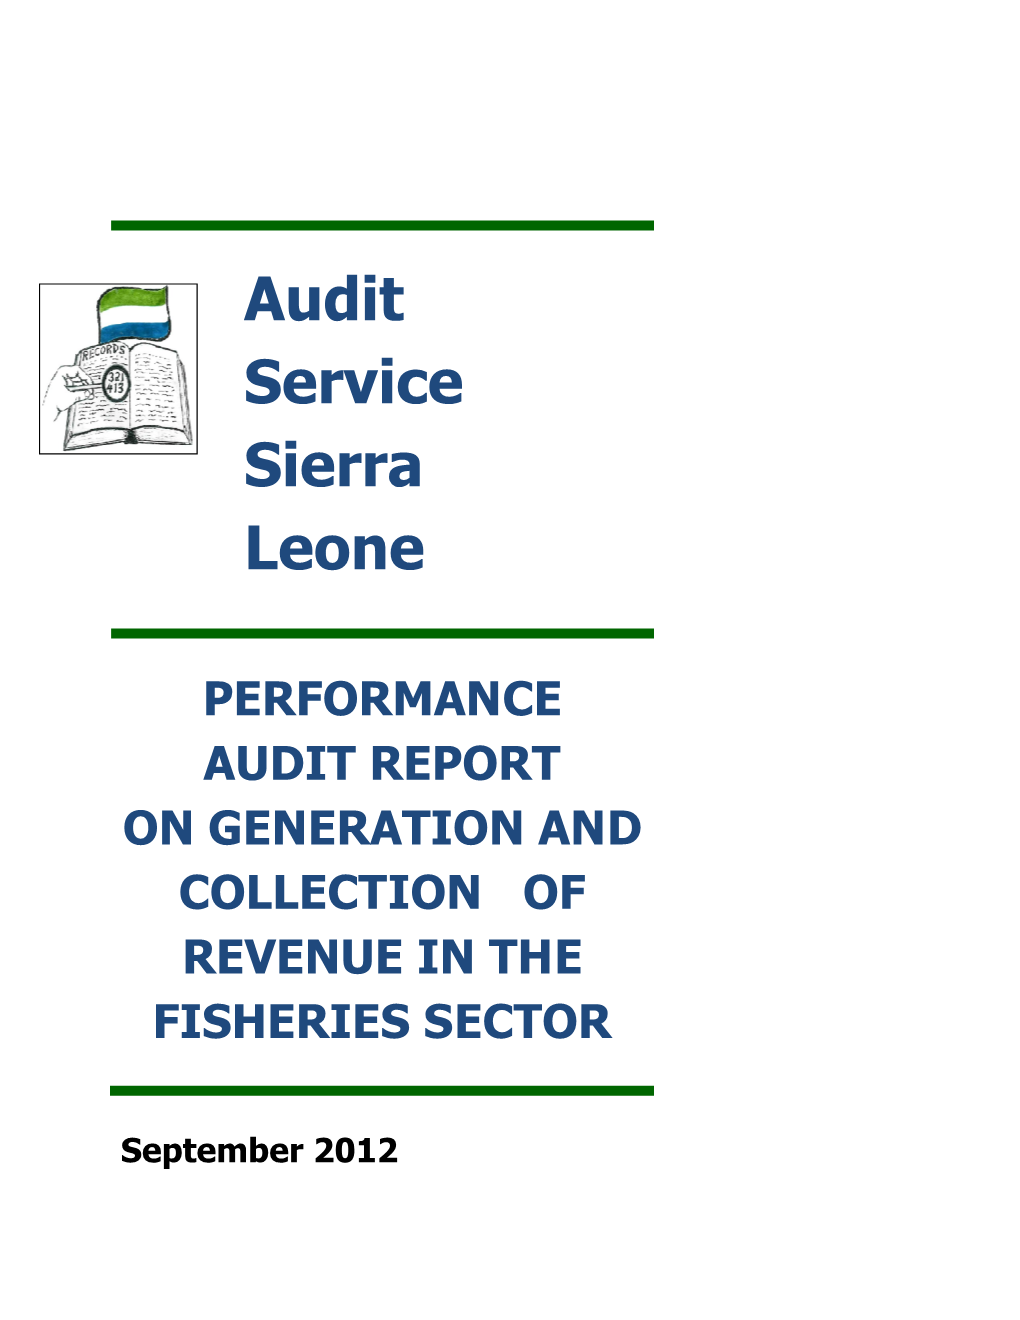 Fisheries Sector Revenue